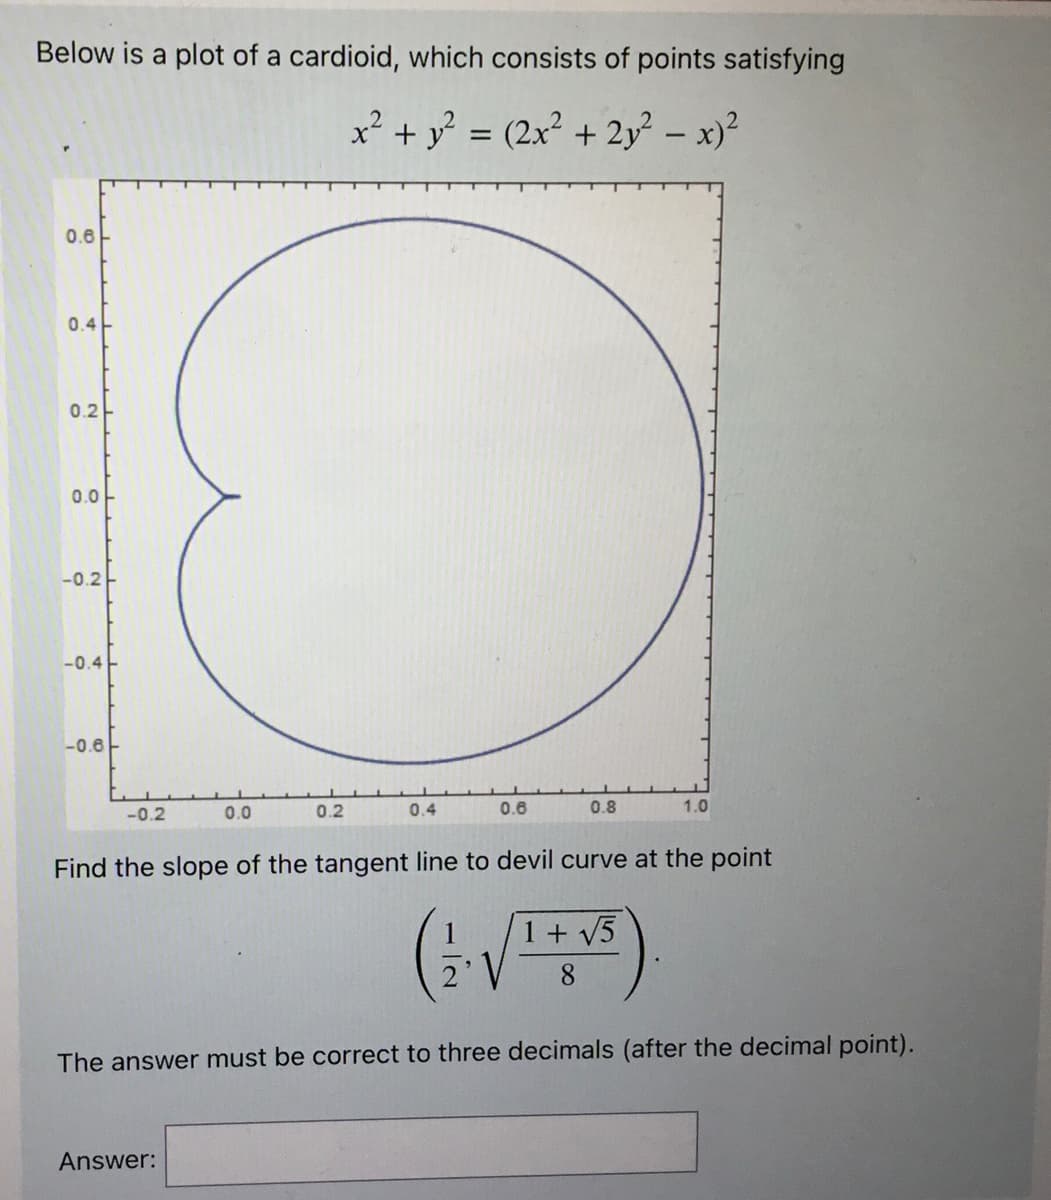 Below is a plot of a cardioid, which consists of points satisfying
x² + y² = (2x² + 2y² − x)²
0.6
0.4
0.2
0.0
-0.2
-0.4
-0.6
-0.2
0.0
0.2
Answer:
0.4
0.6
0.8
Find the slope of the tangent line to devil curve at the point
(2. v
1.0
1 + √5
8
The answer must be correct to three decimals (after the decimal point).